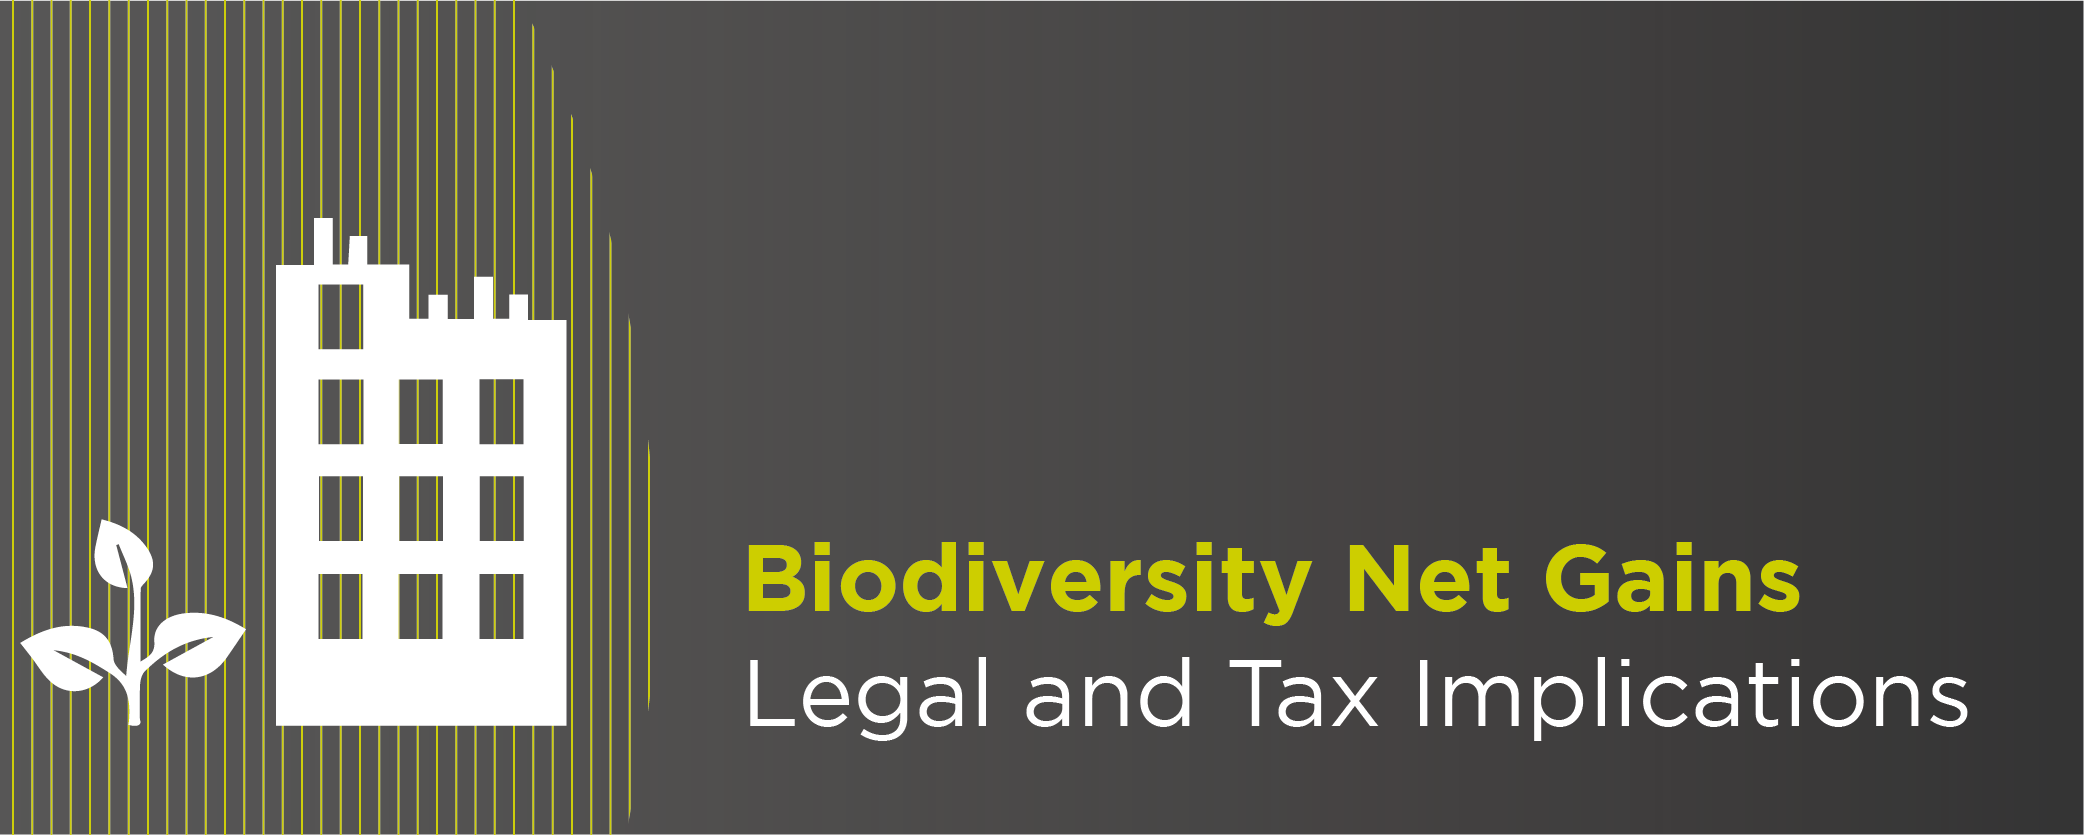 Biodiversity Net Gains: Legal and Tax Implications